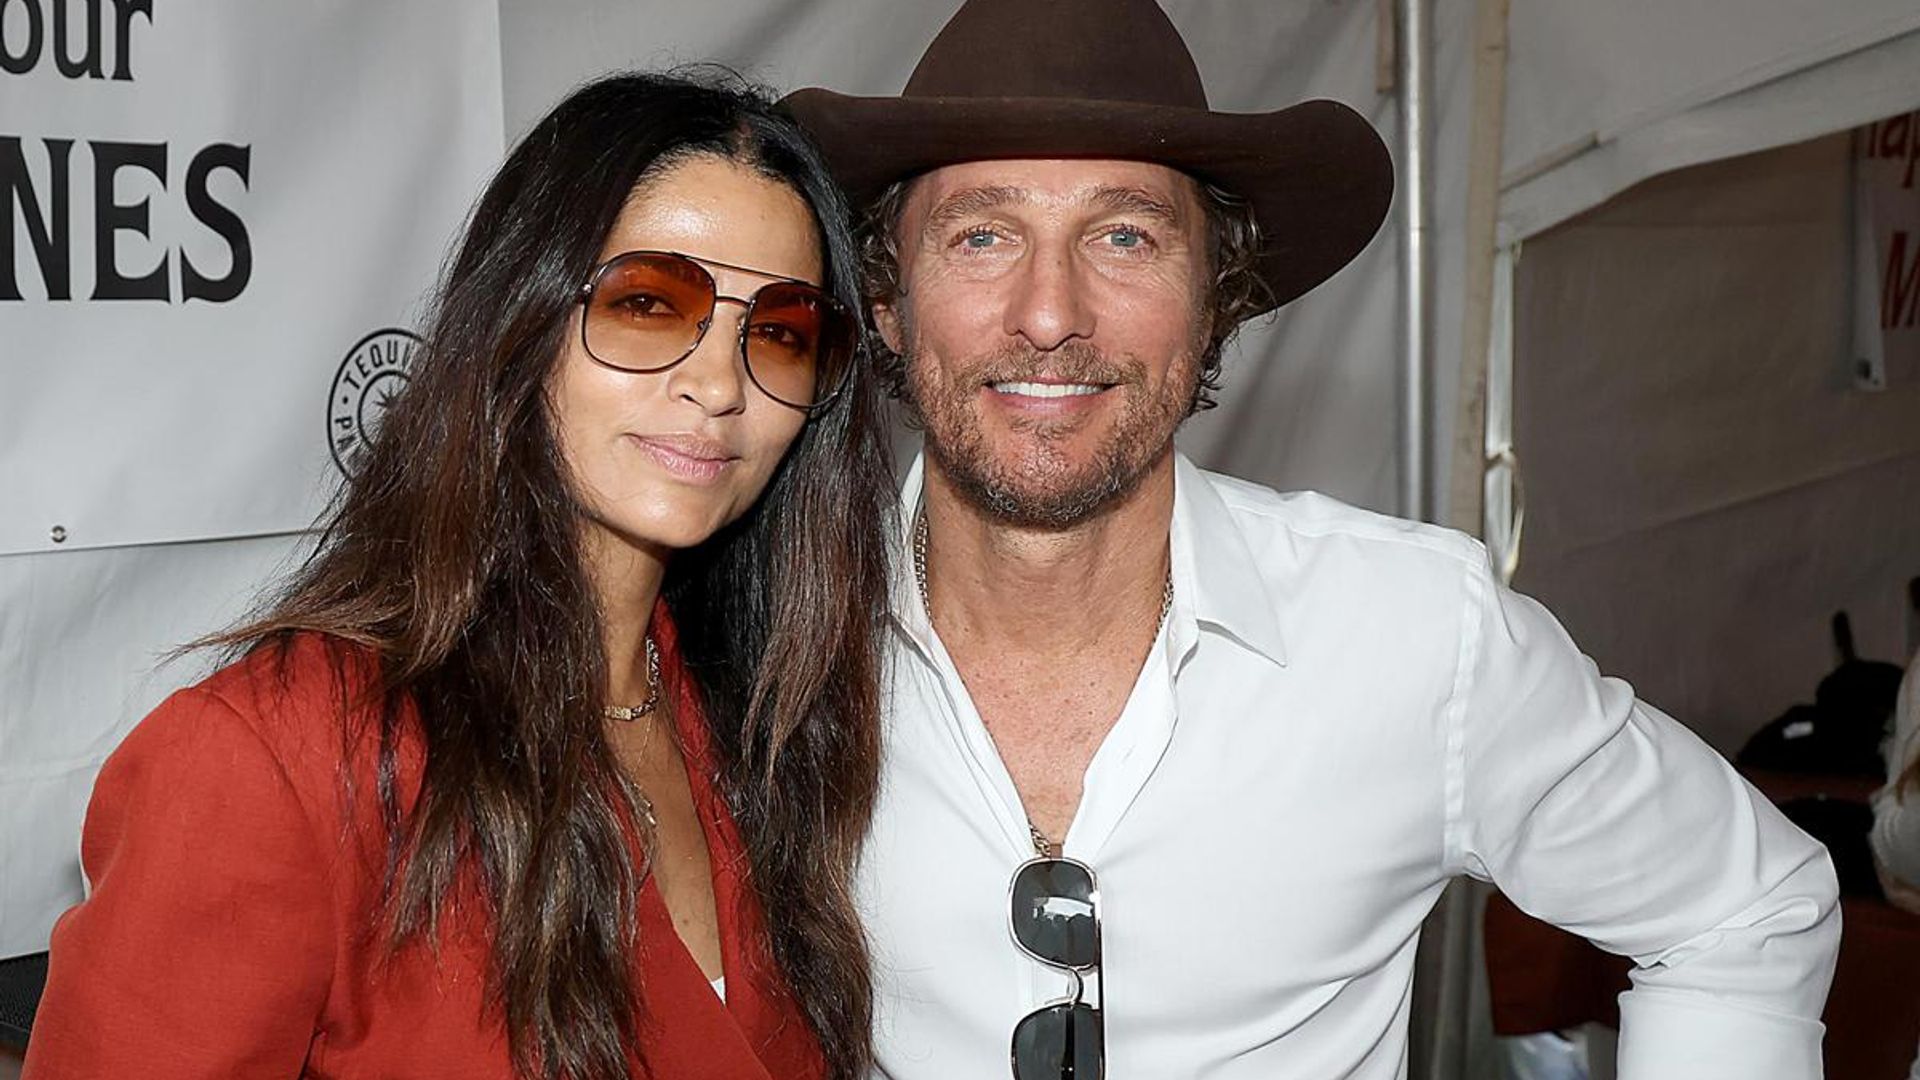 Matthew McConaughey and Camila Alves go pantless for the launch of their tequila brand